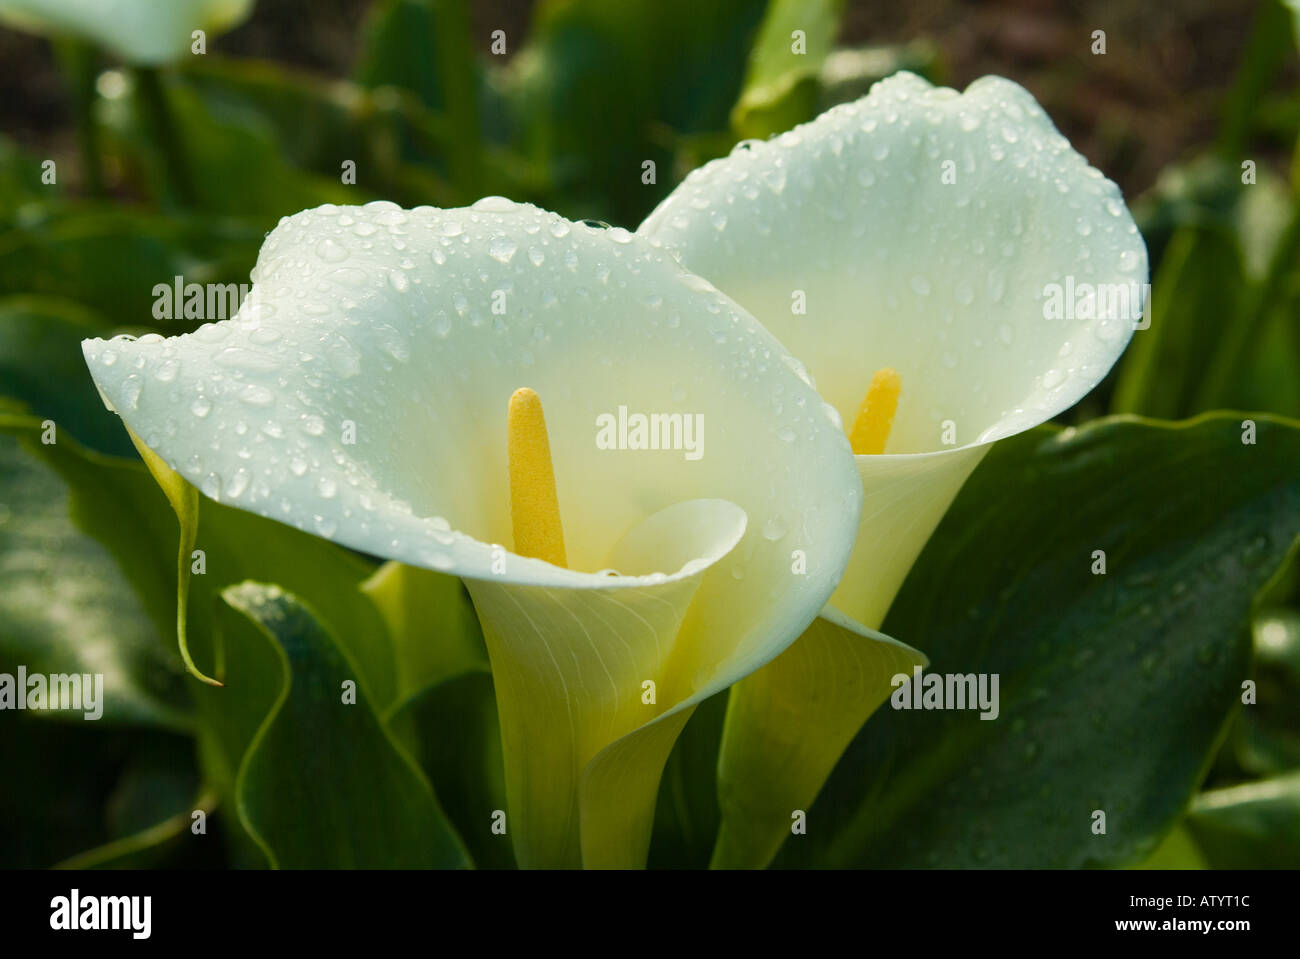 Zantedeschia aethiopica, arum lilies also known as call lillies are a toxic plant that contains calcium oxalate, considered to be an invasive weed. Stock Photo